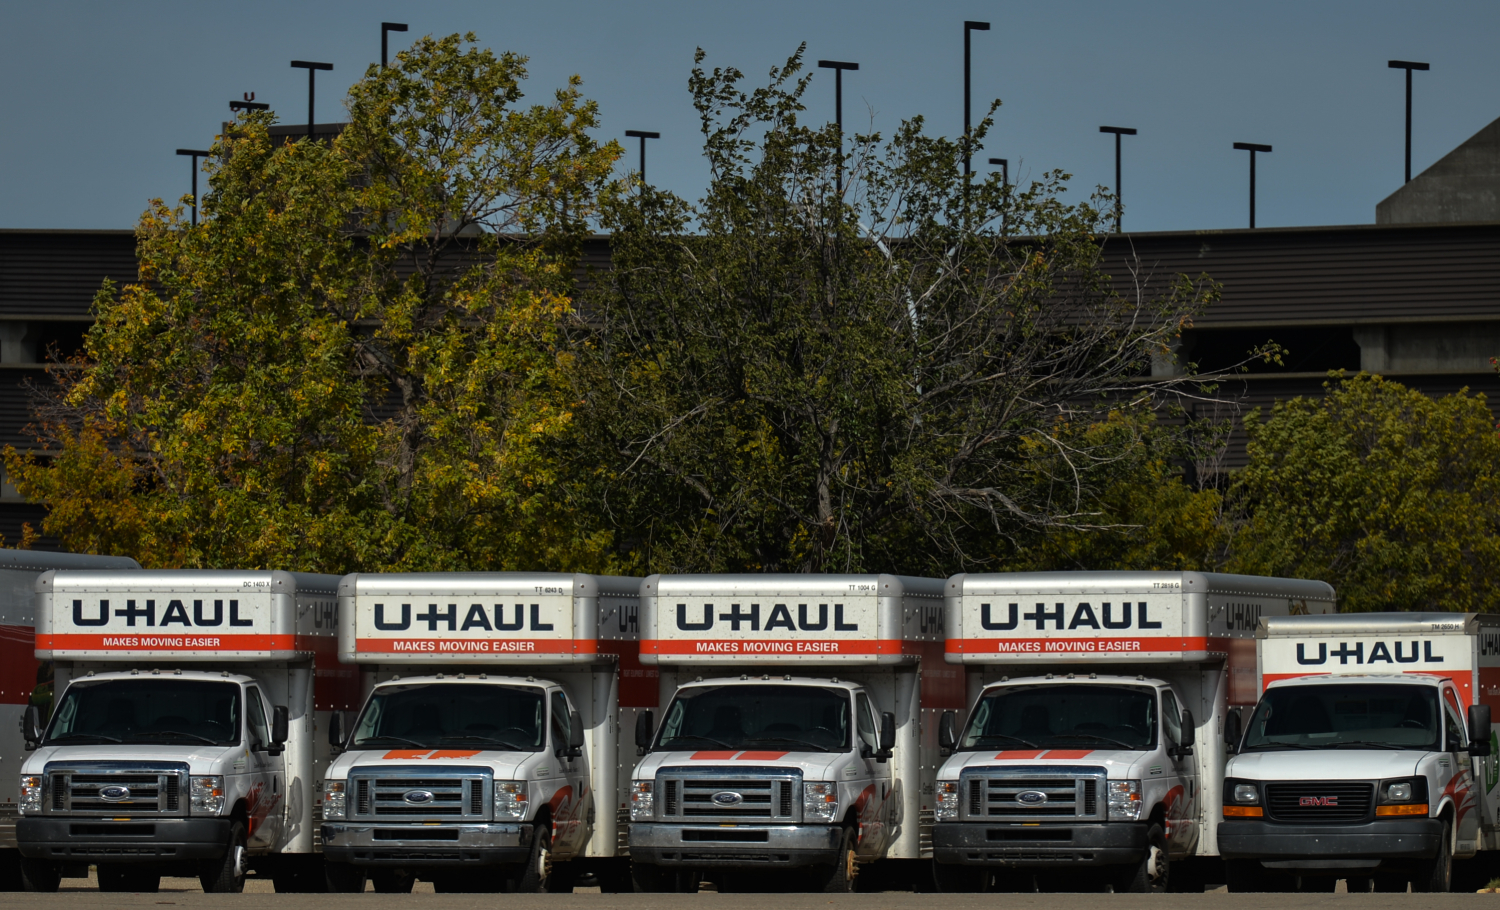 U-Haul ran out of trucks in California. Sell Your House at Baylisting.com